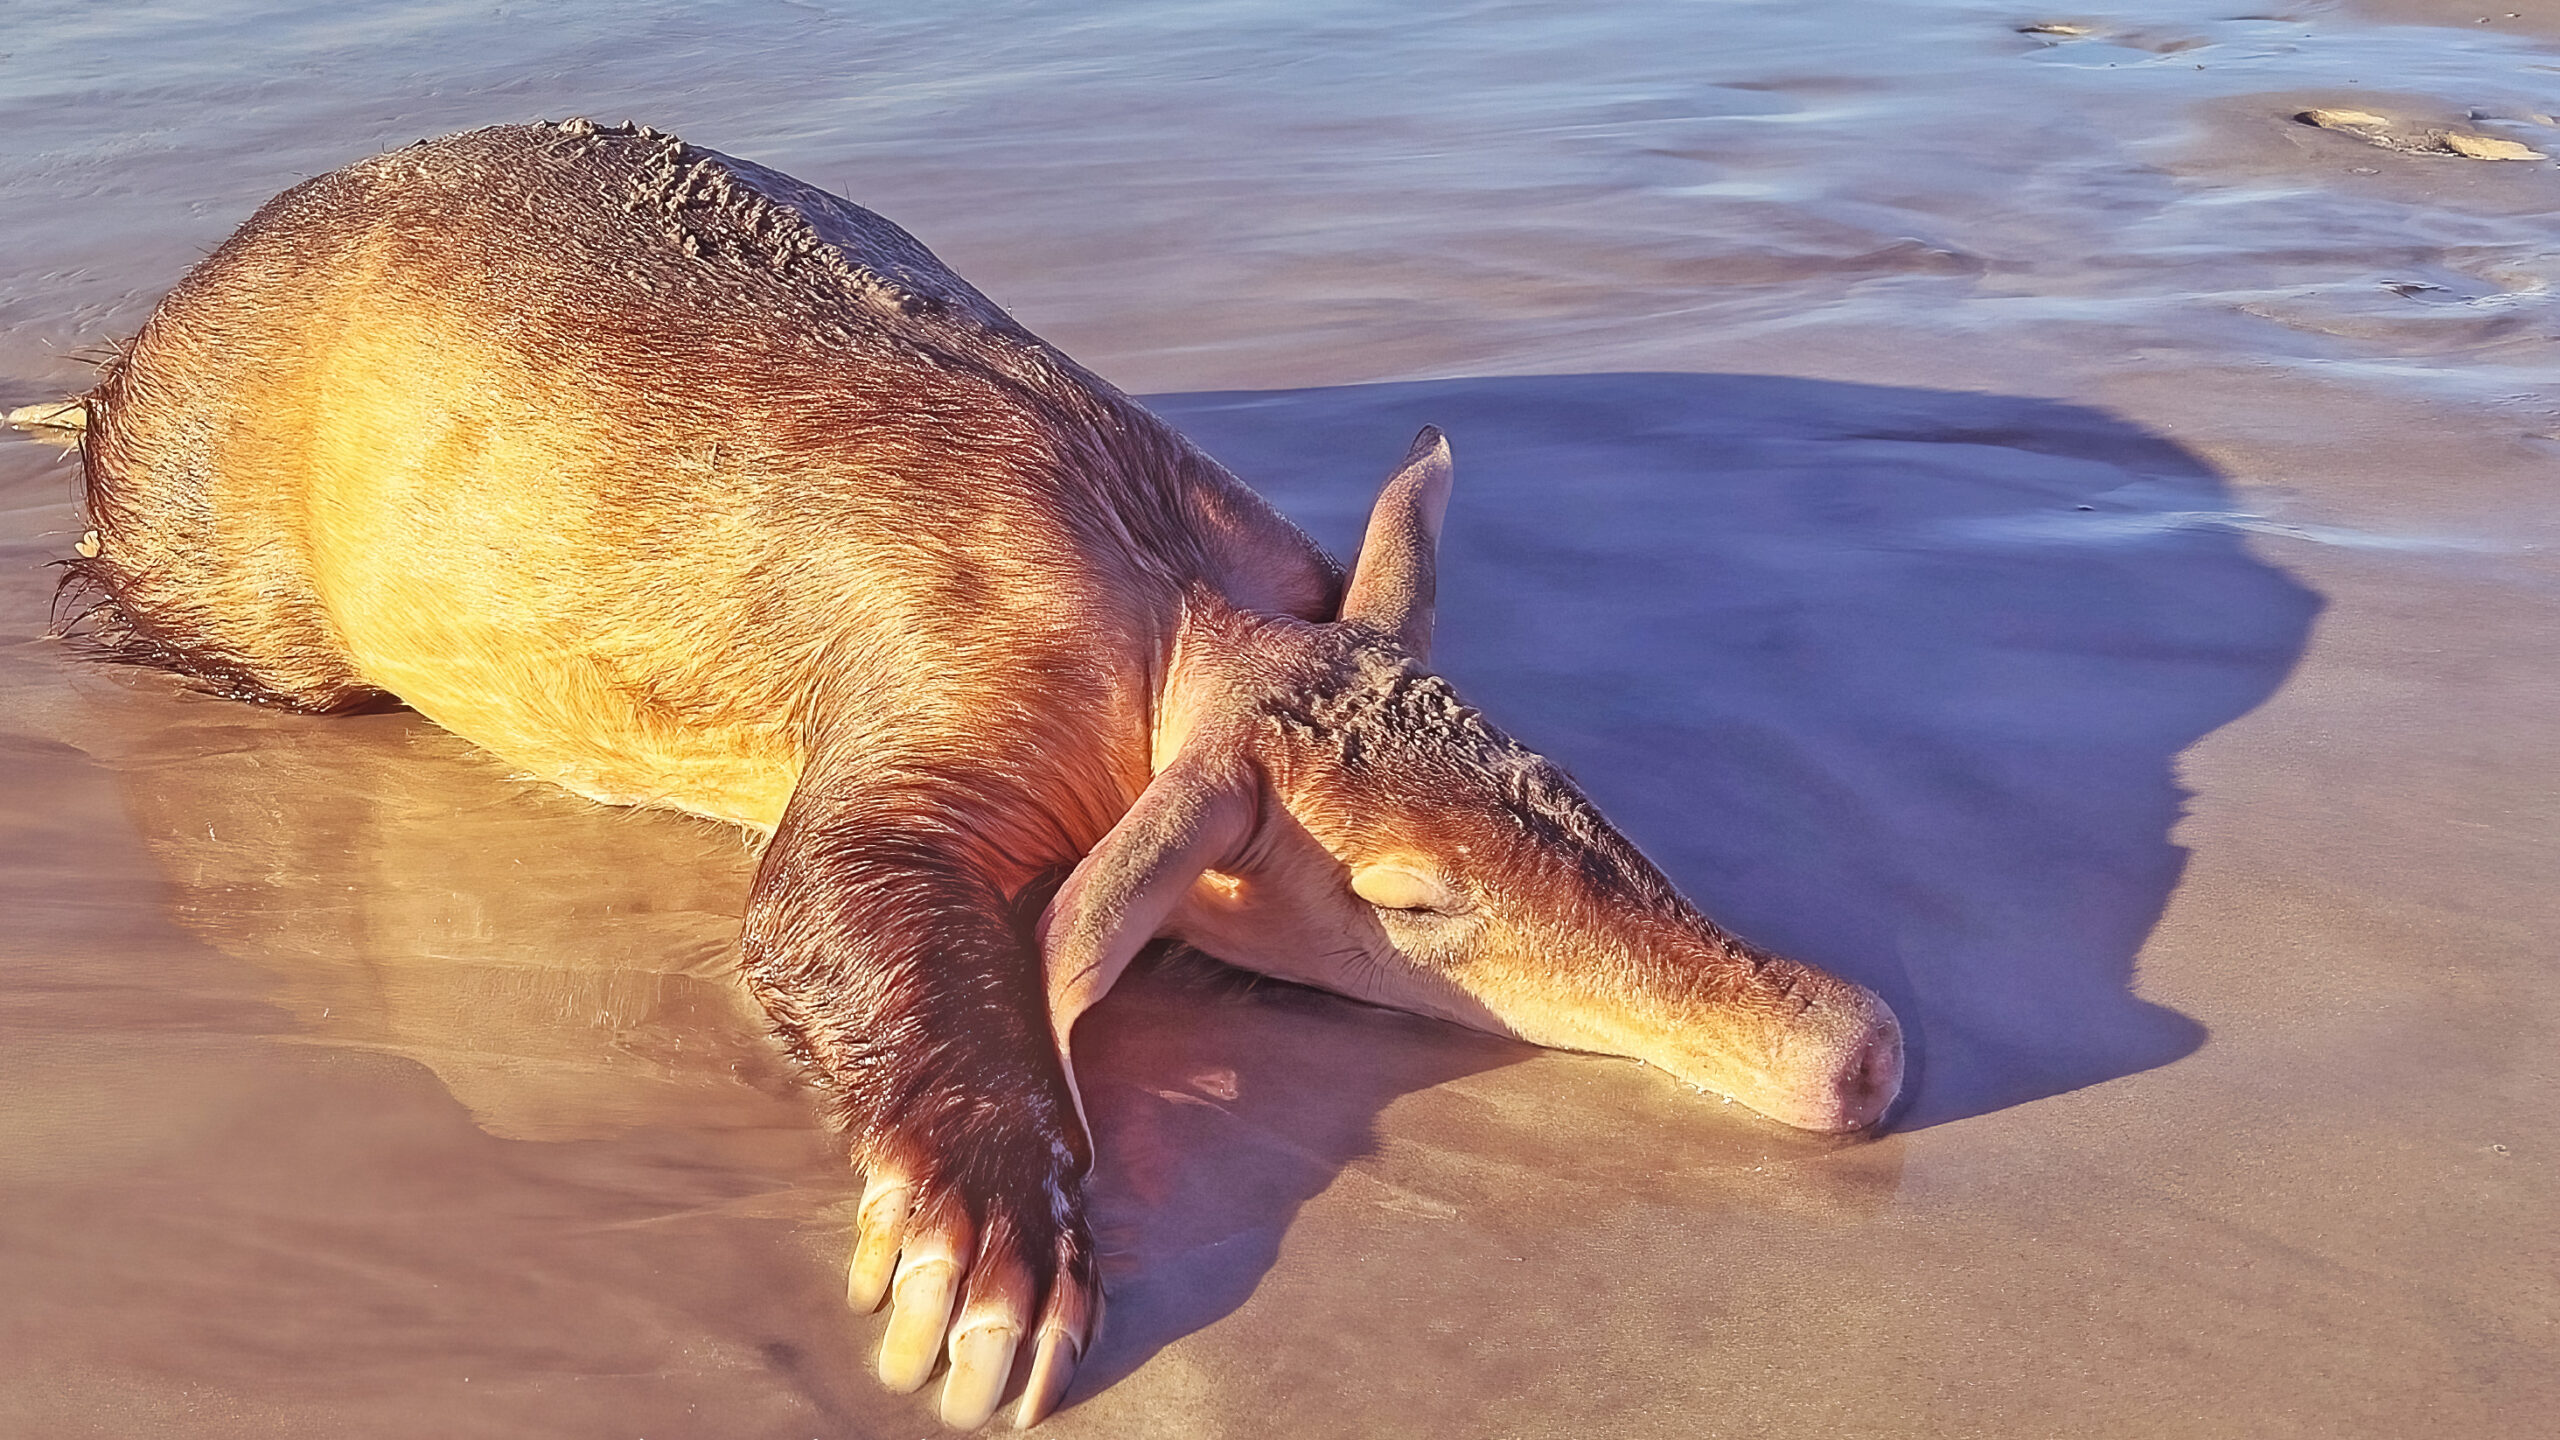 Aardvark (Ant Bear) Washed Up at Cape Town Beach